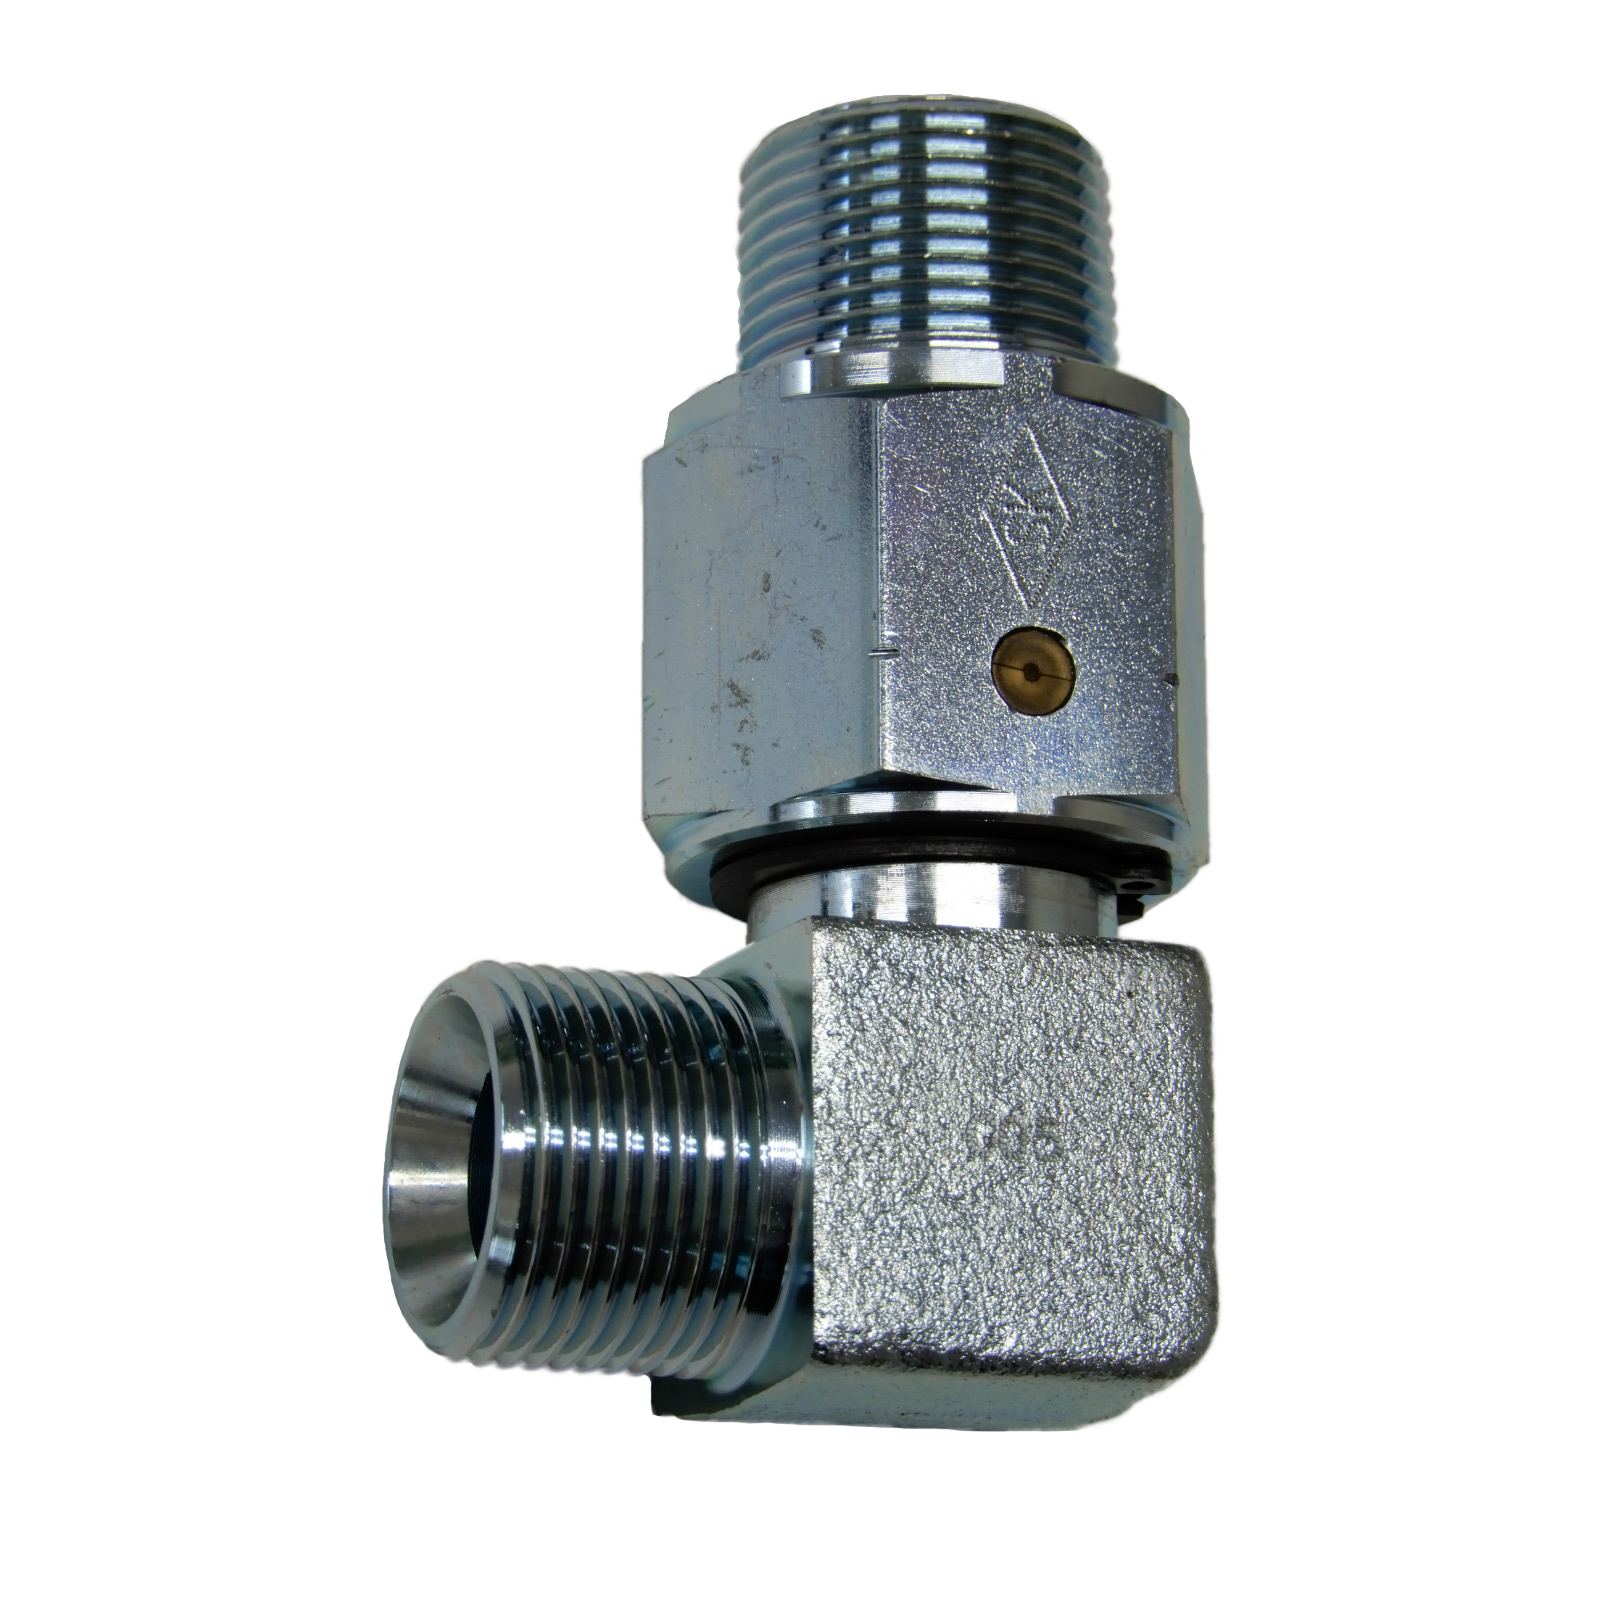 Hydraulic Hose Adapters - Elbow 90° Swivel Adapter, Male BSPT to Male BSPP, SK Type, SKL-34 Series